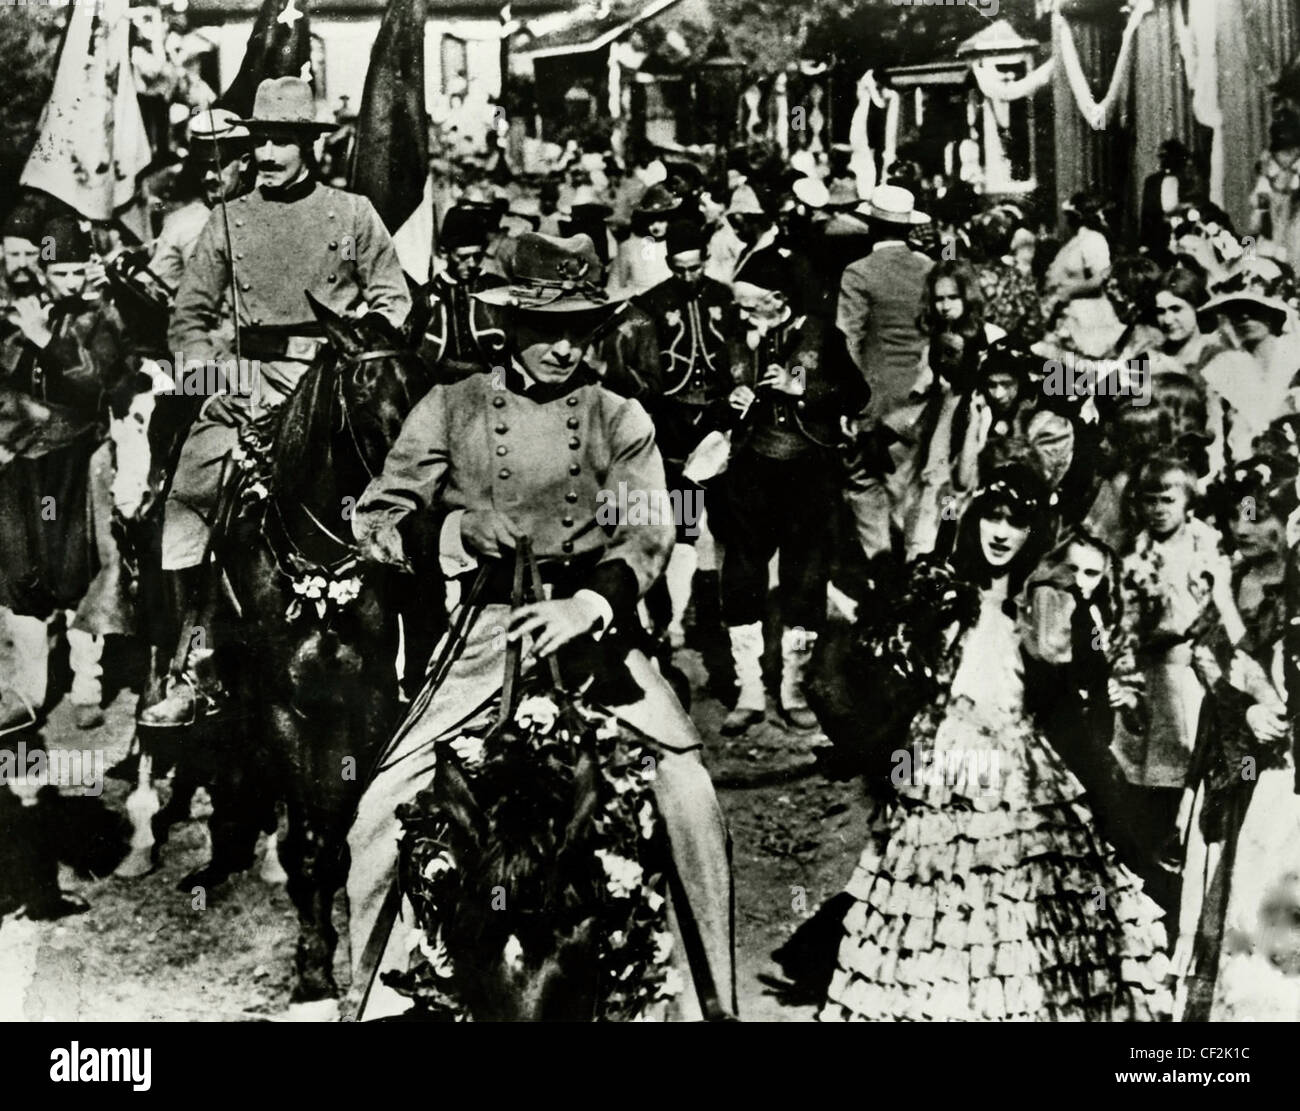 THE BIRTH OF A NATION (1915) HENRY B. WALTHALL D.W. GRIFFITH (DIR) 008 MOVIESTORE COLLECTION LTD Stock Photo